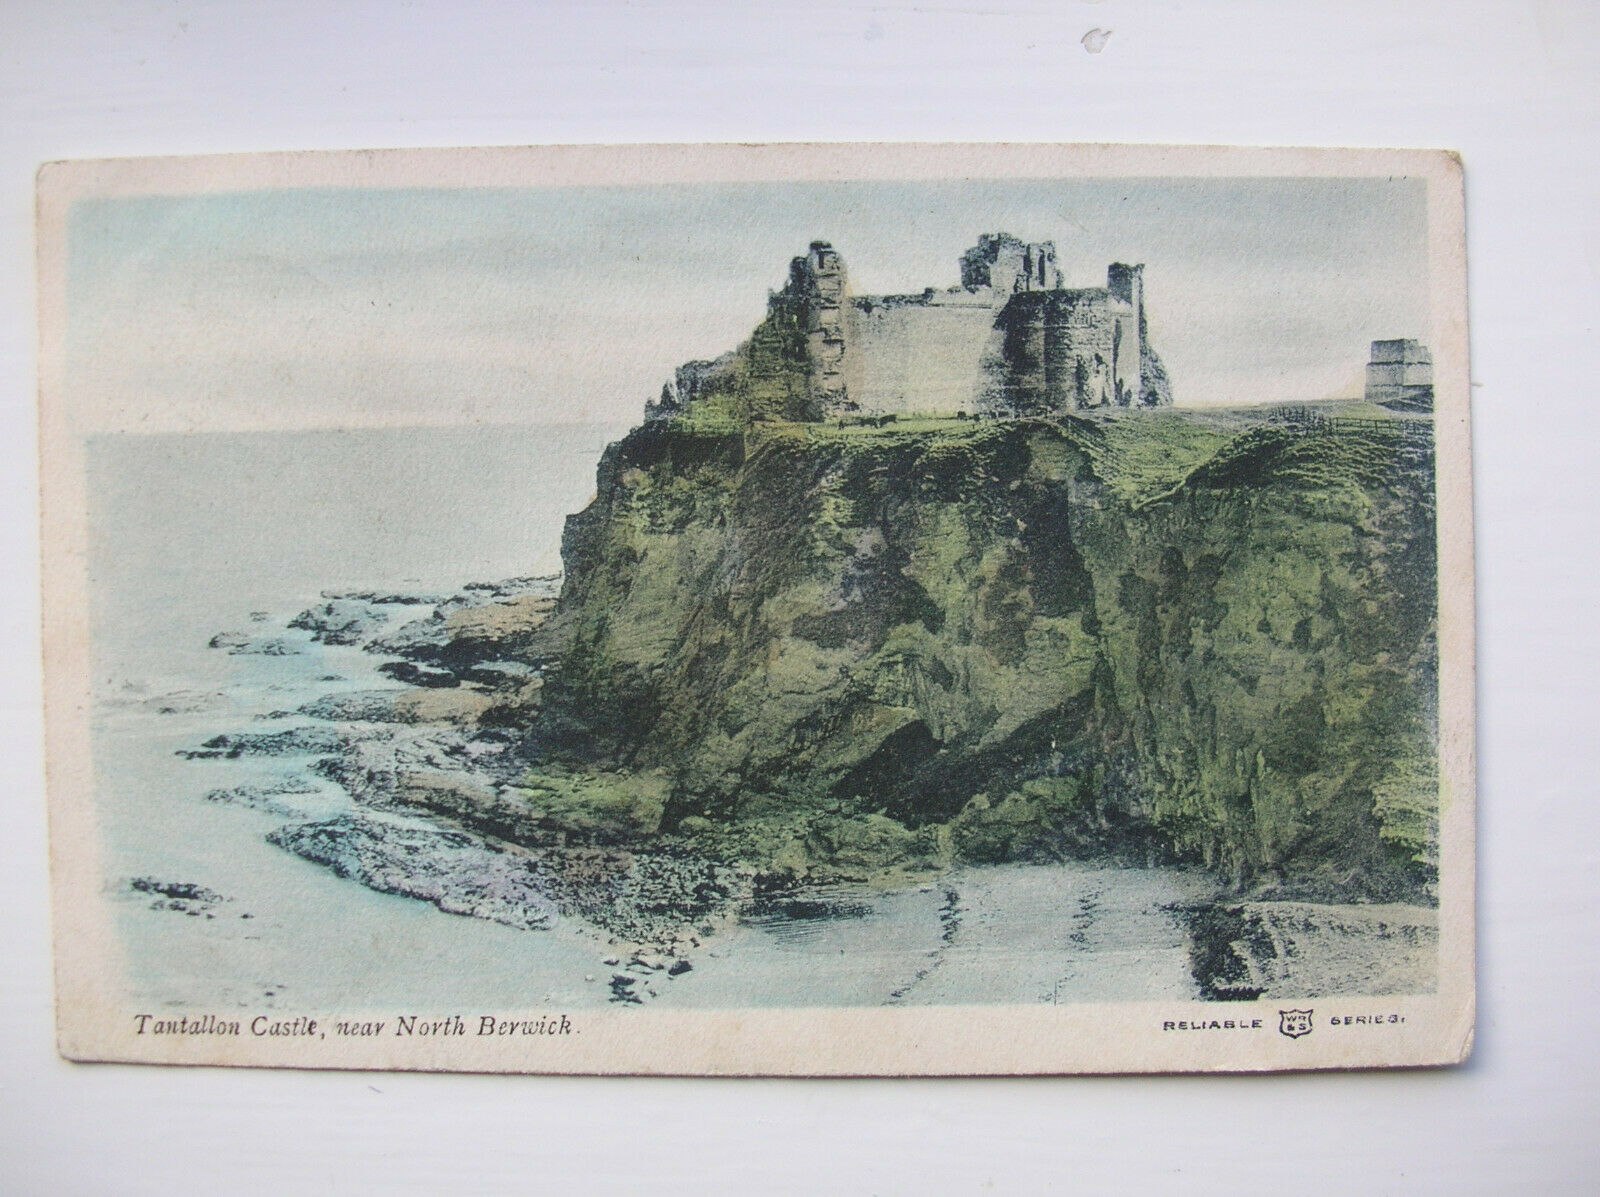 House Clearance - North Berwick – Tantallon Castle. (Reliable – 1905)